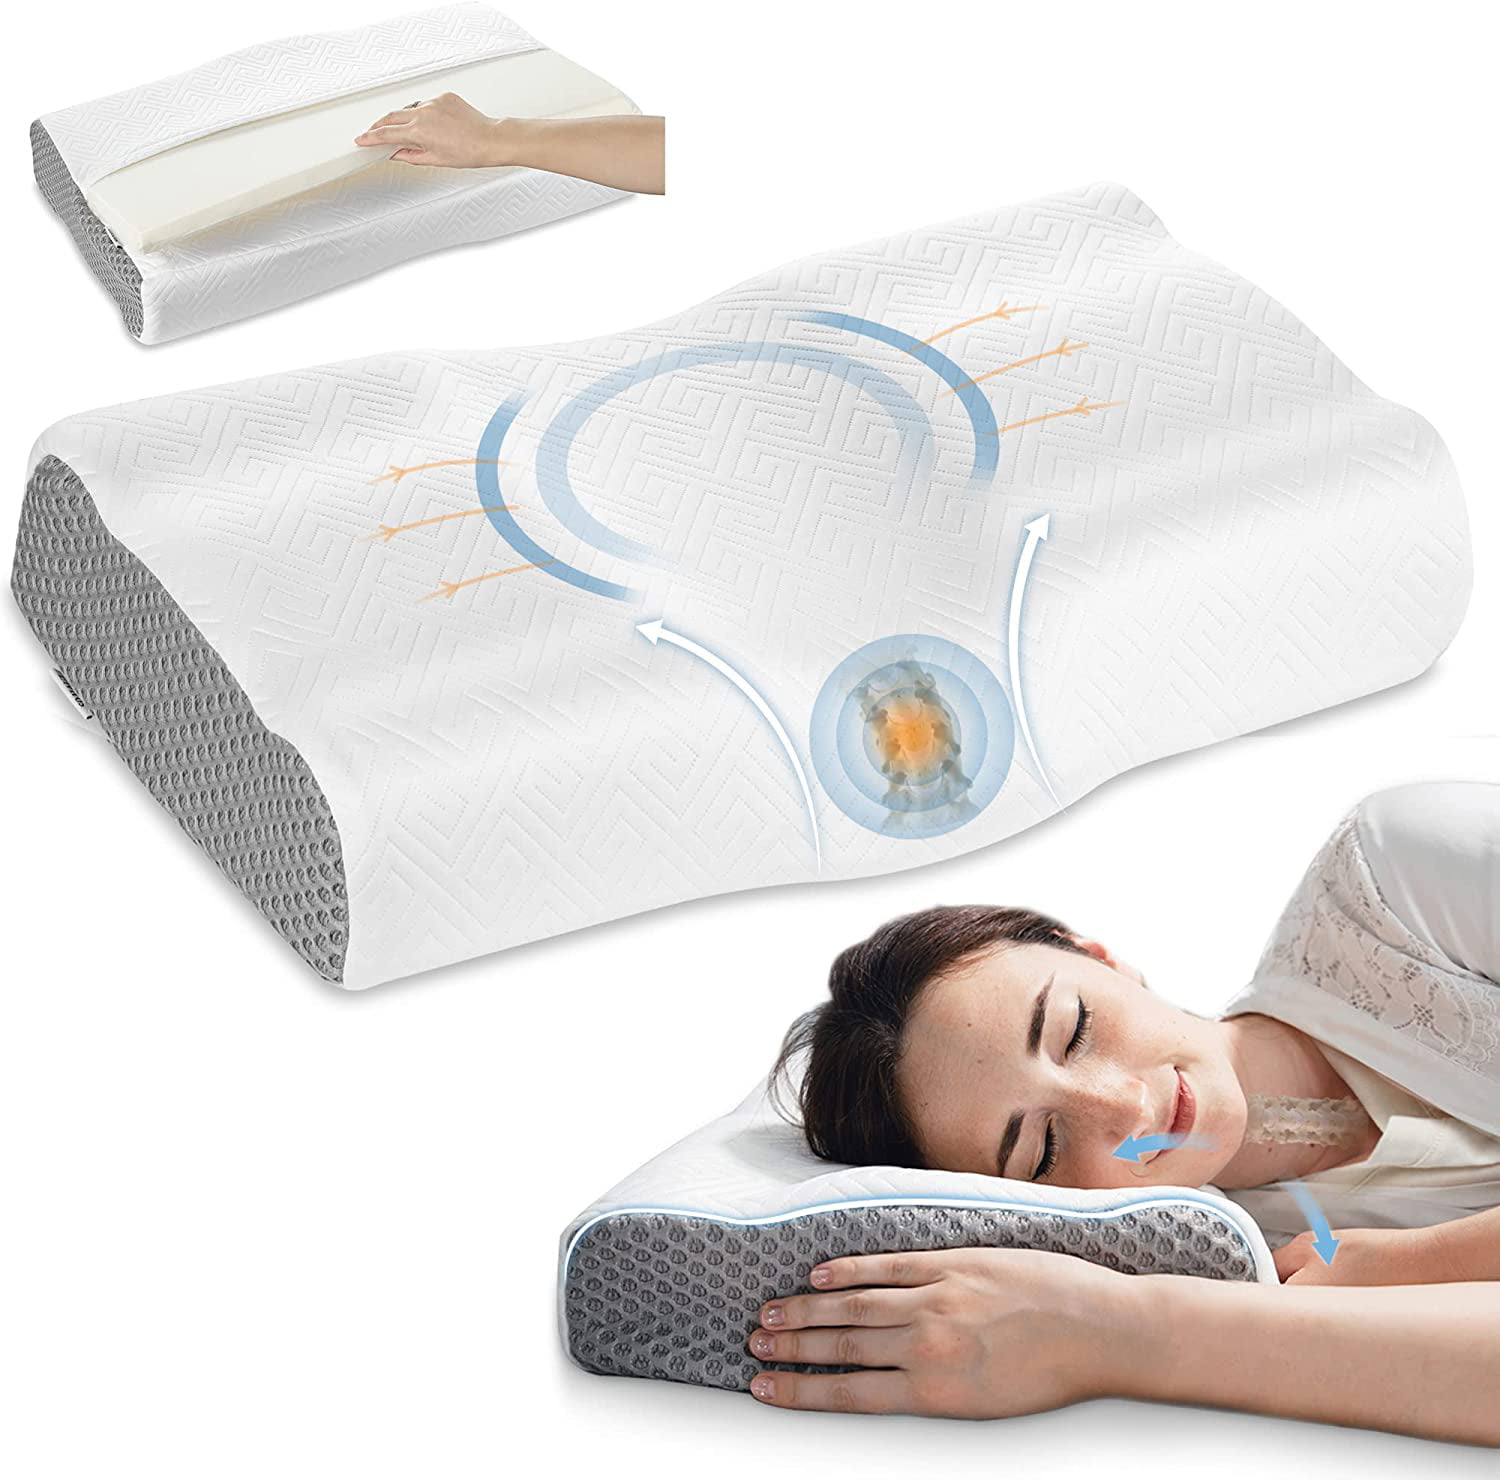 1/2Pack Contour Pillow Orthopedic Bed Sleeping Ergonomic Cervical for Neck Pain 